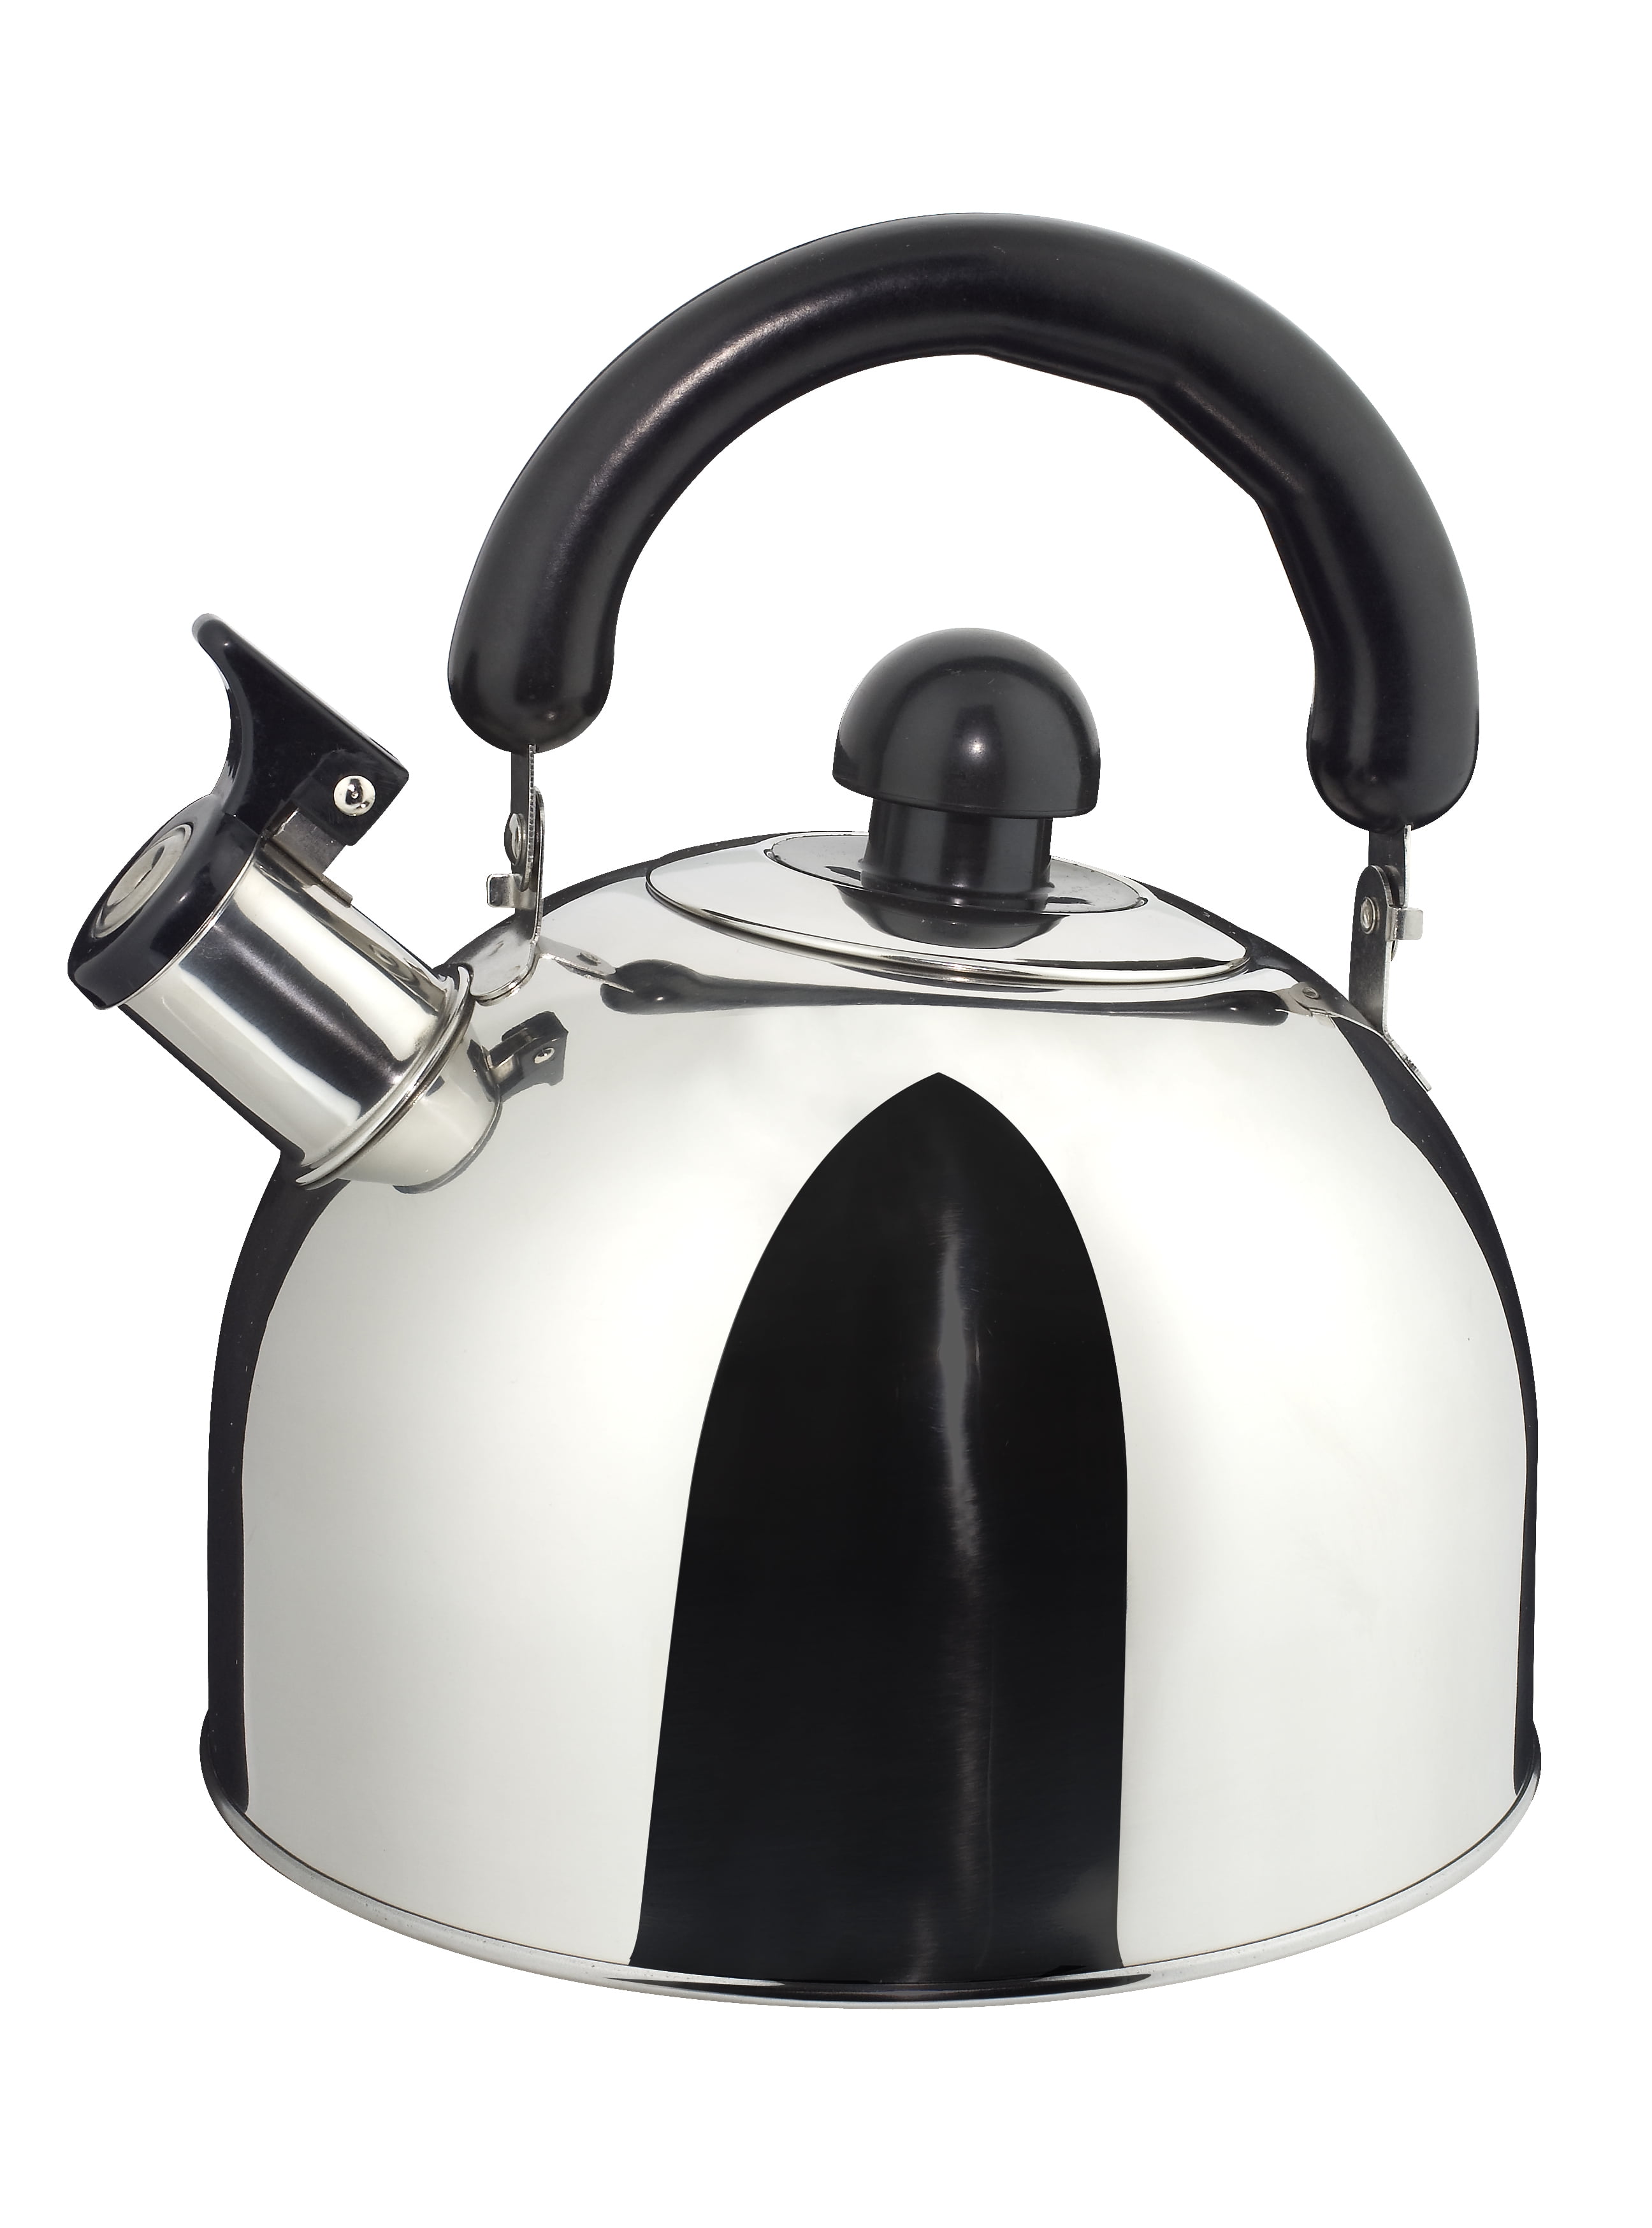 paderno electric kettle